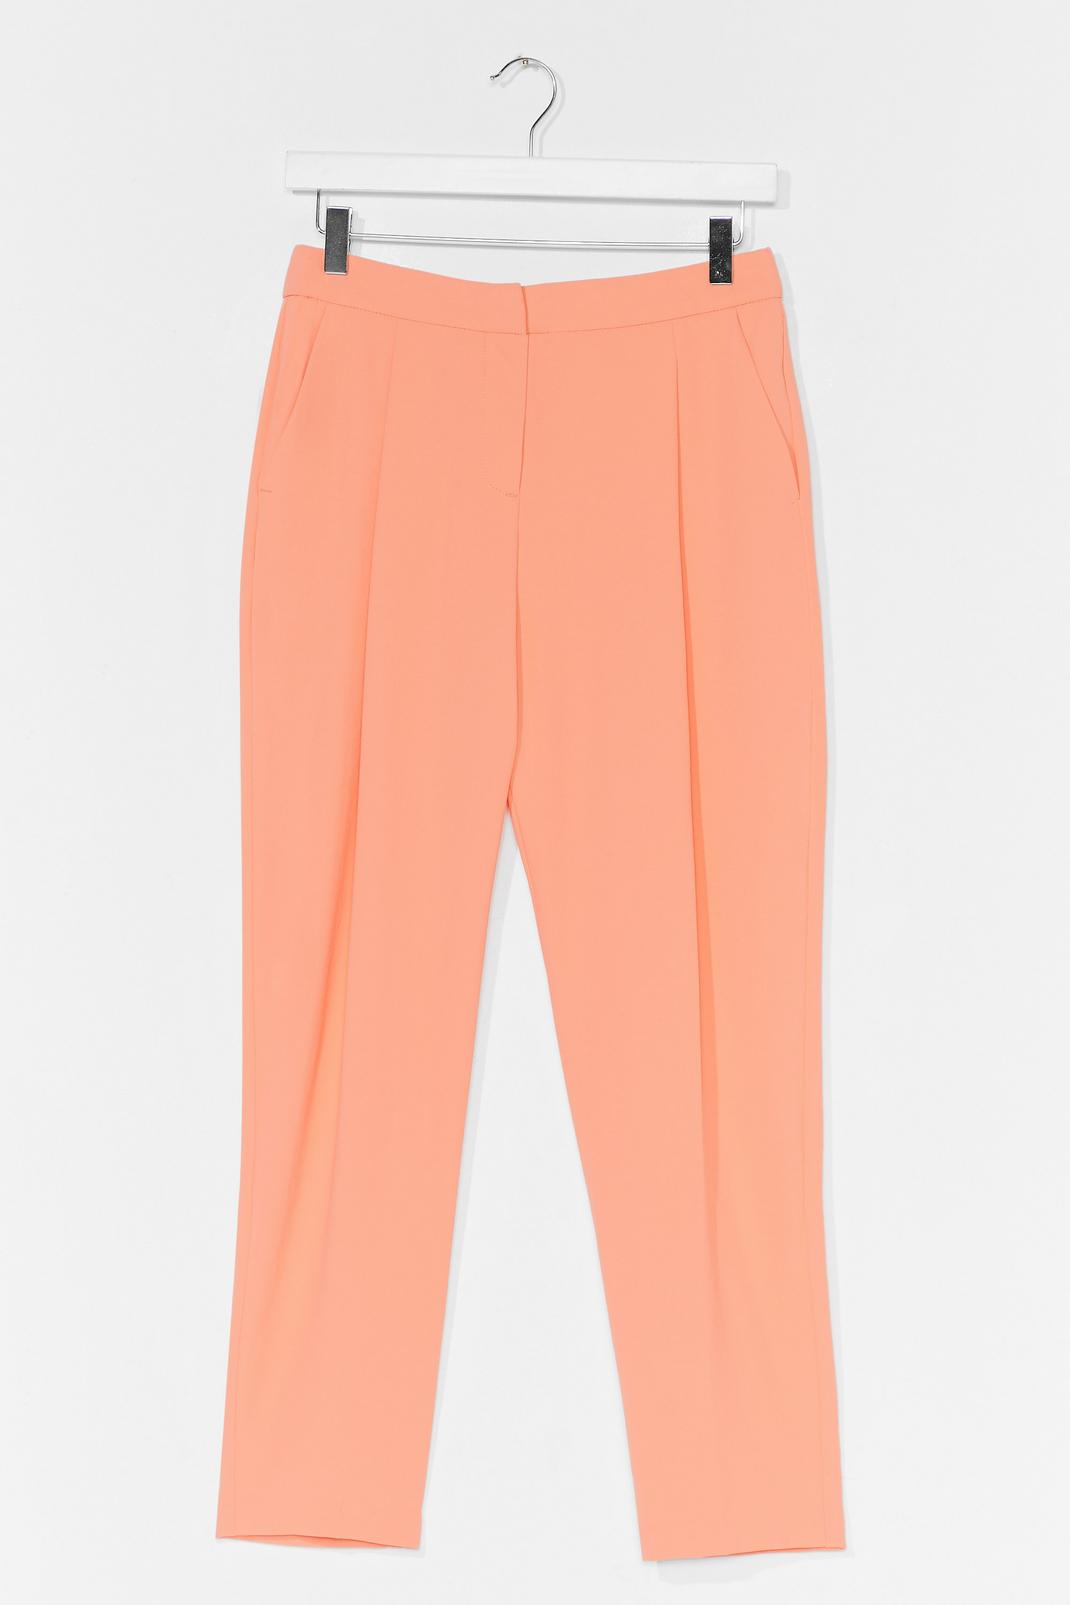 Apricot Suits You High-Waisted Tailored Trousers image number 1